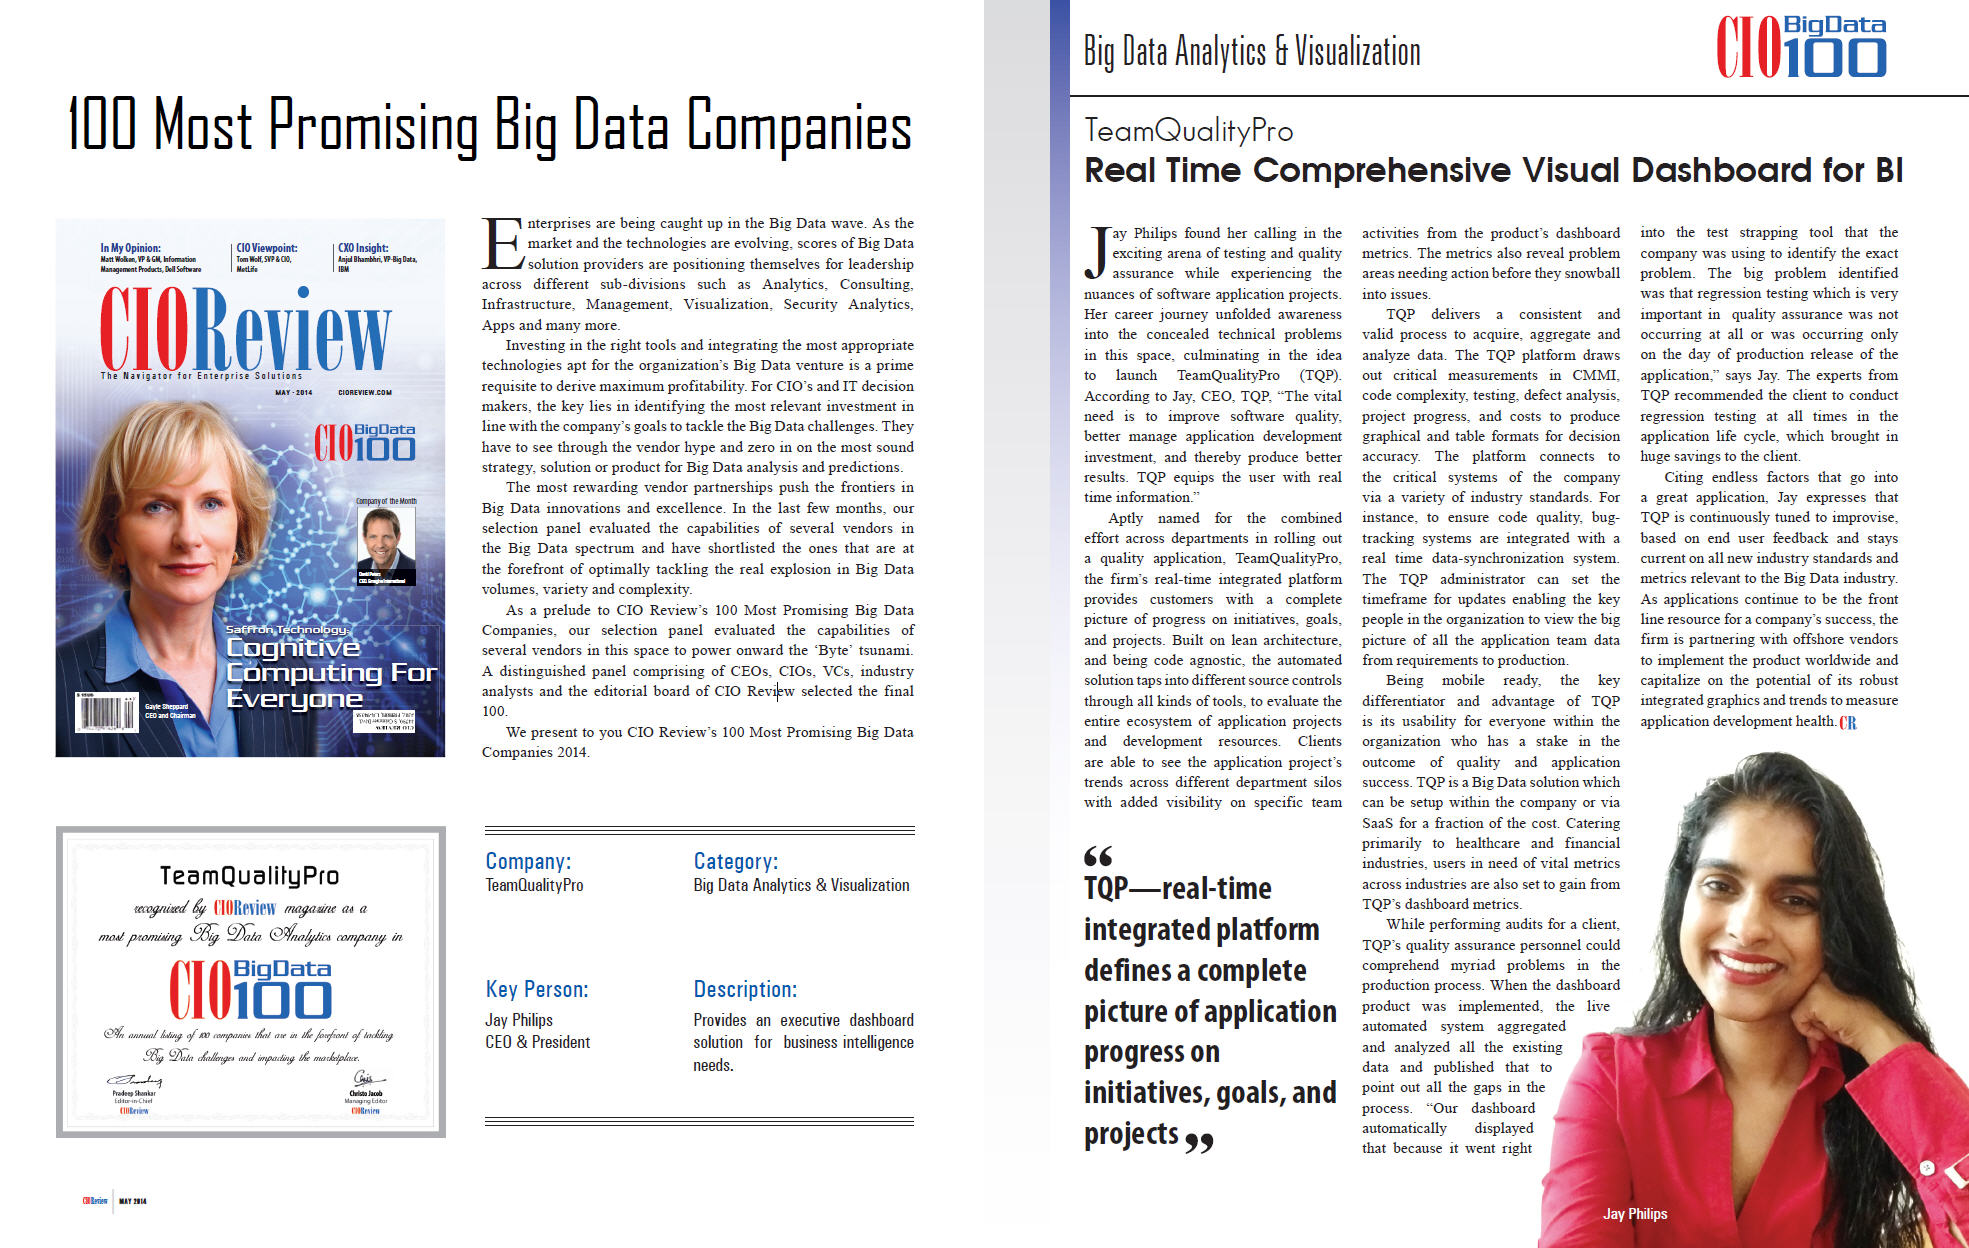 CIOReview - 100 Most Promising Big Data Companies